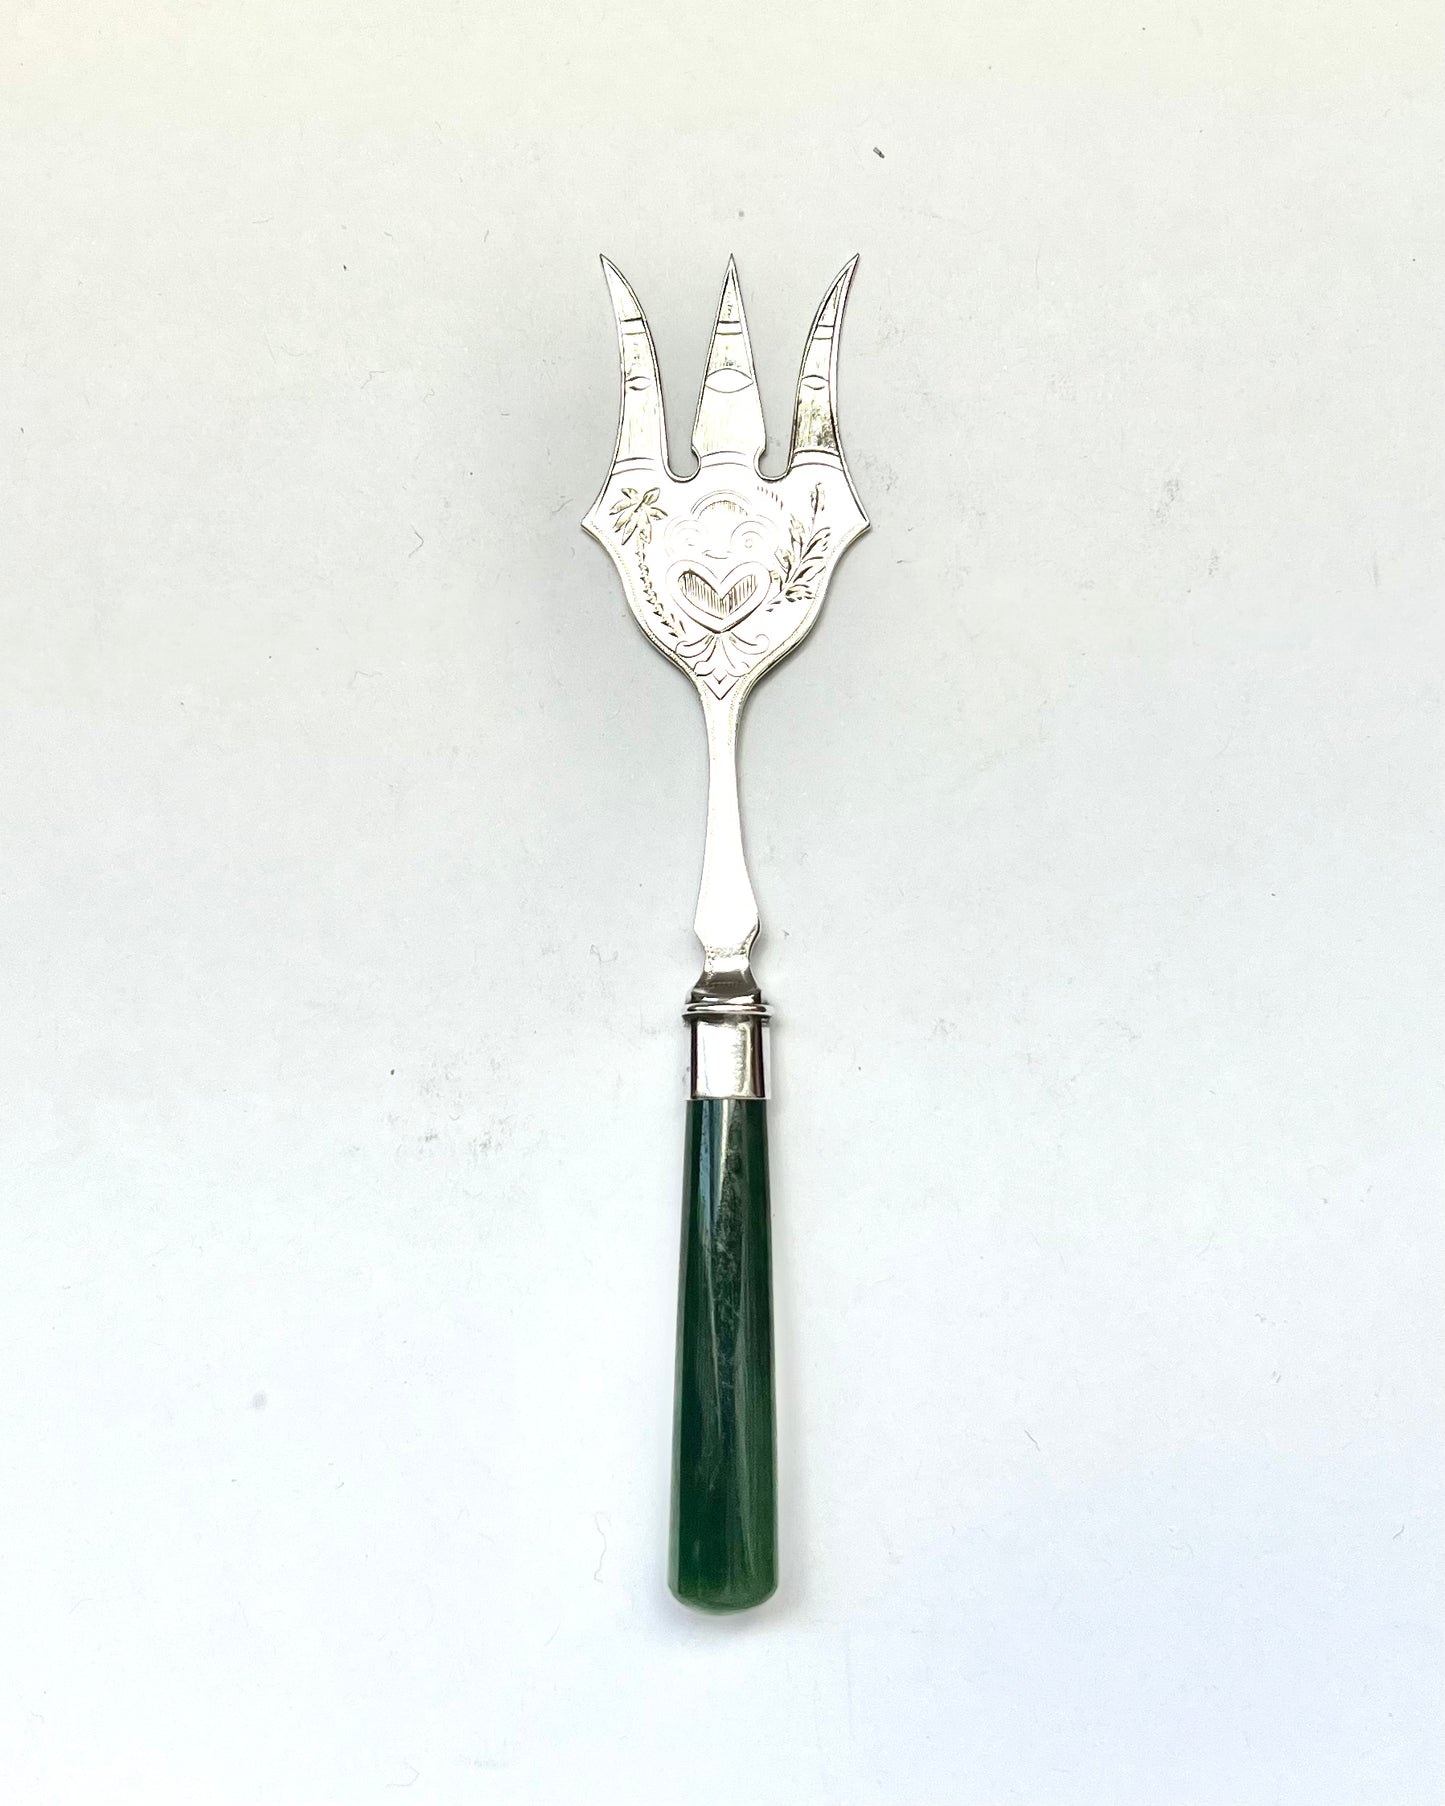 Antique New Zealand sterling silver cocktail fork with nephrite jade handle, early 20th century